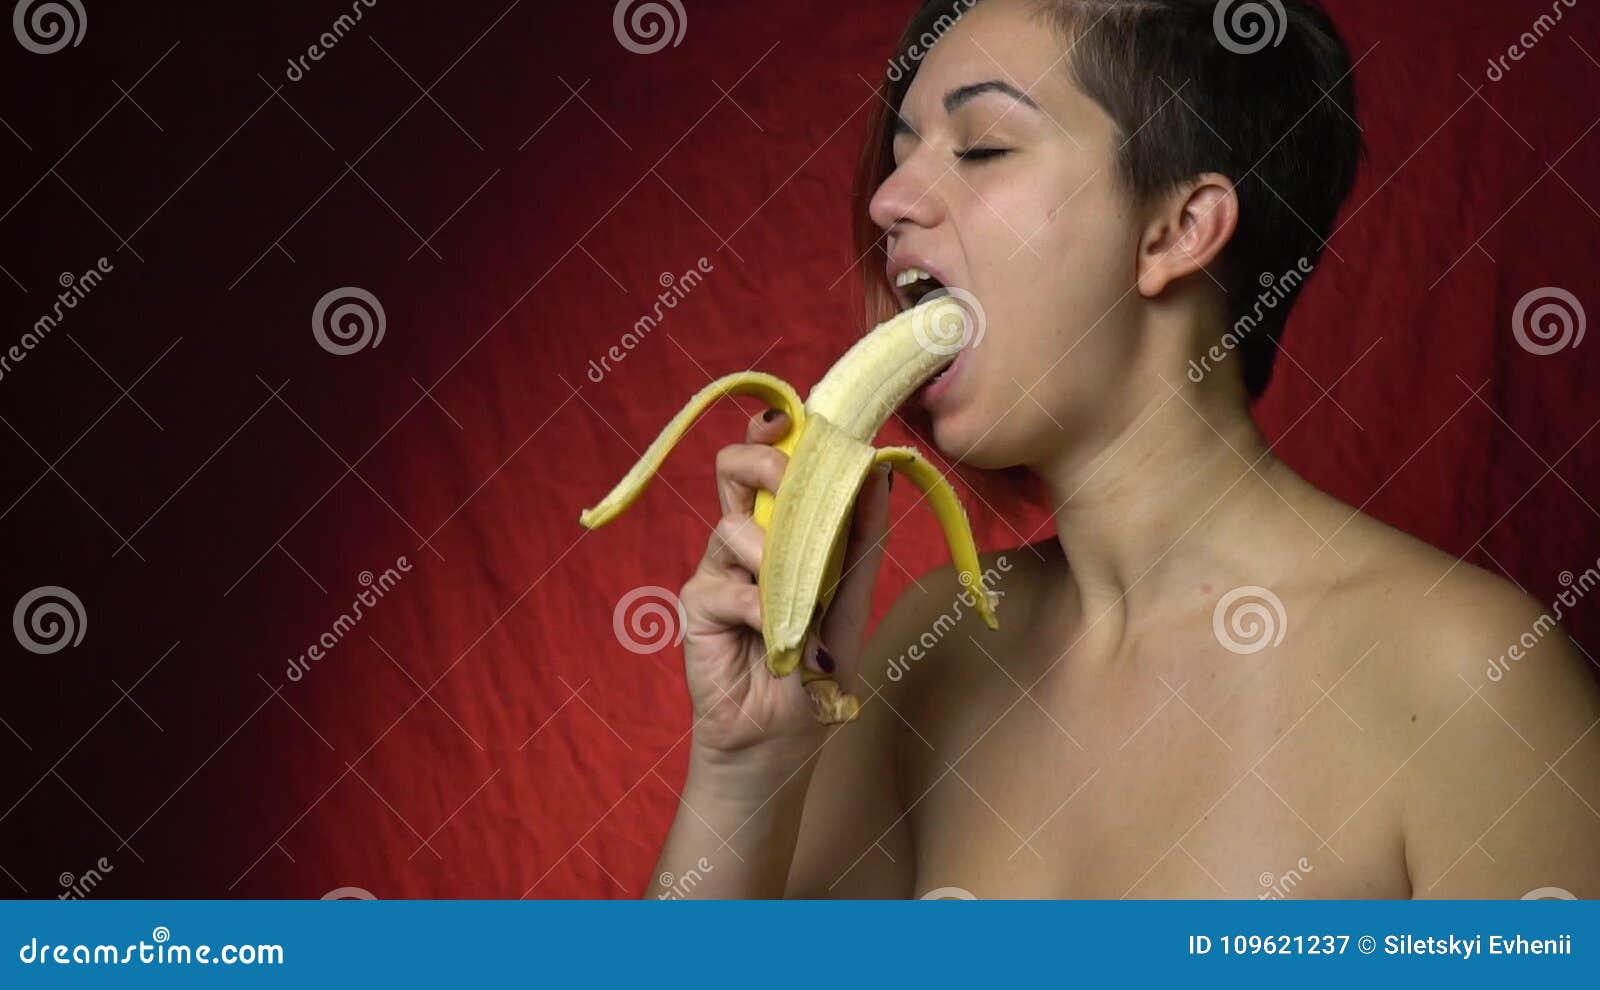 delbert patterson recommends girl sucking on banana pic